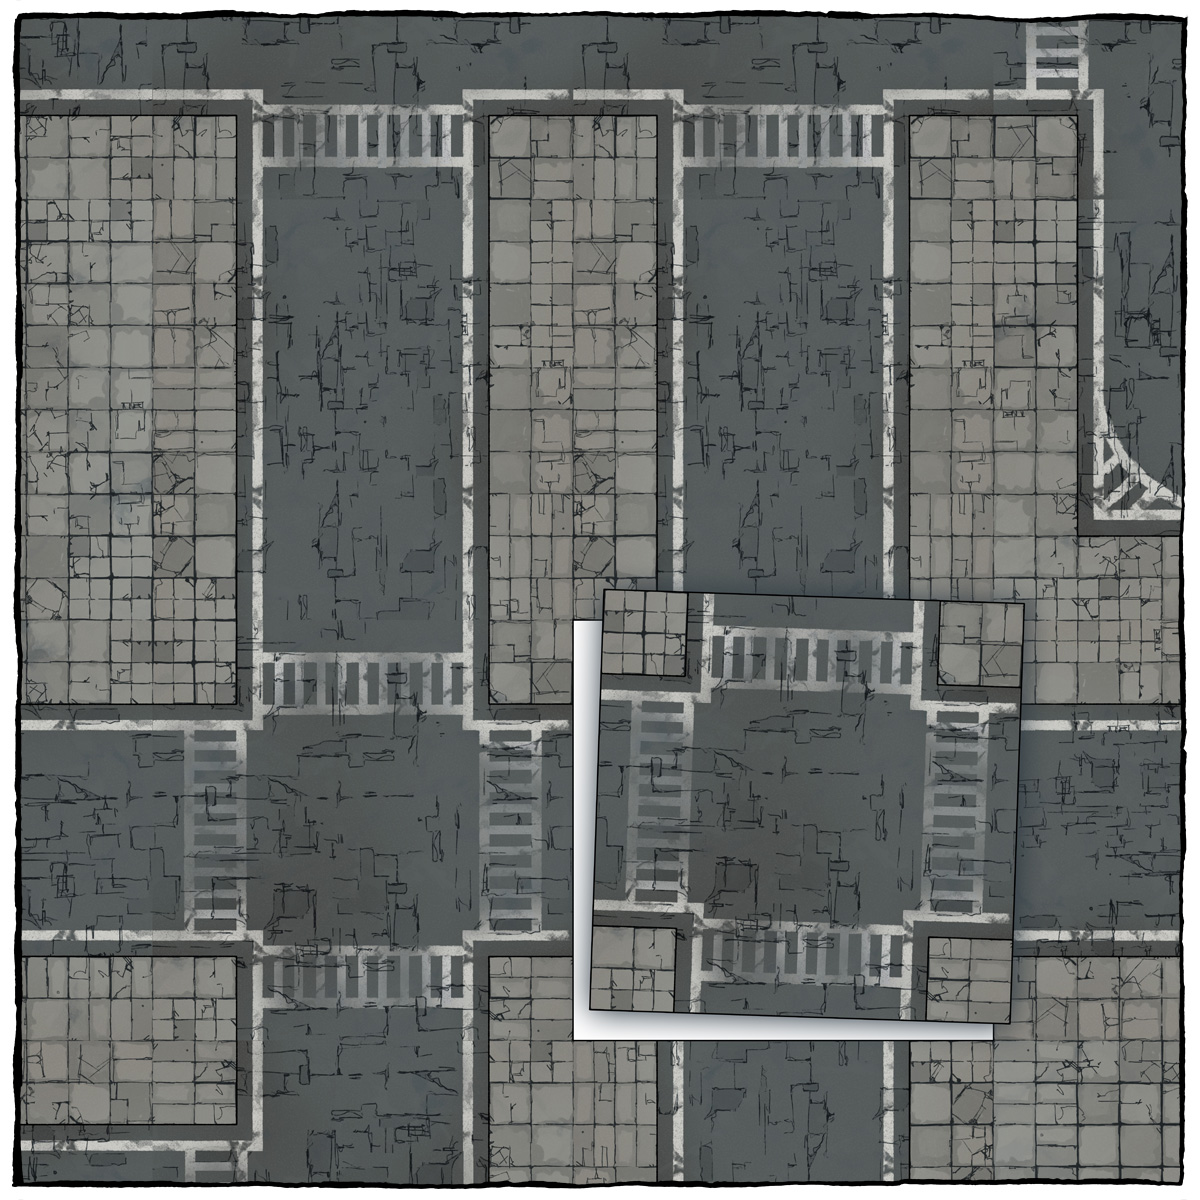 Ross I Ve Just Released My New Set Of Map Tiles These Are All A Part Of My Current Cyberpunk Project But Are Useful For So Much More Please Enjoy